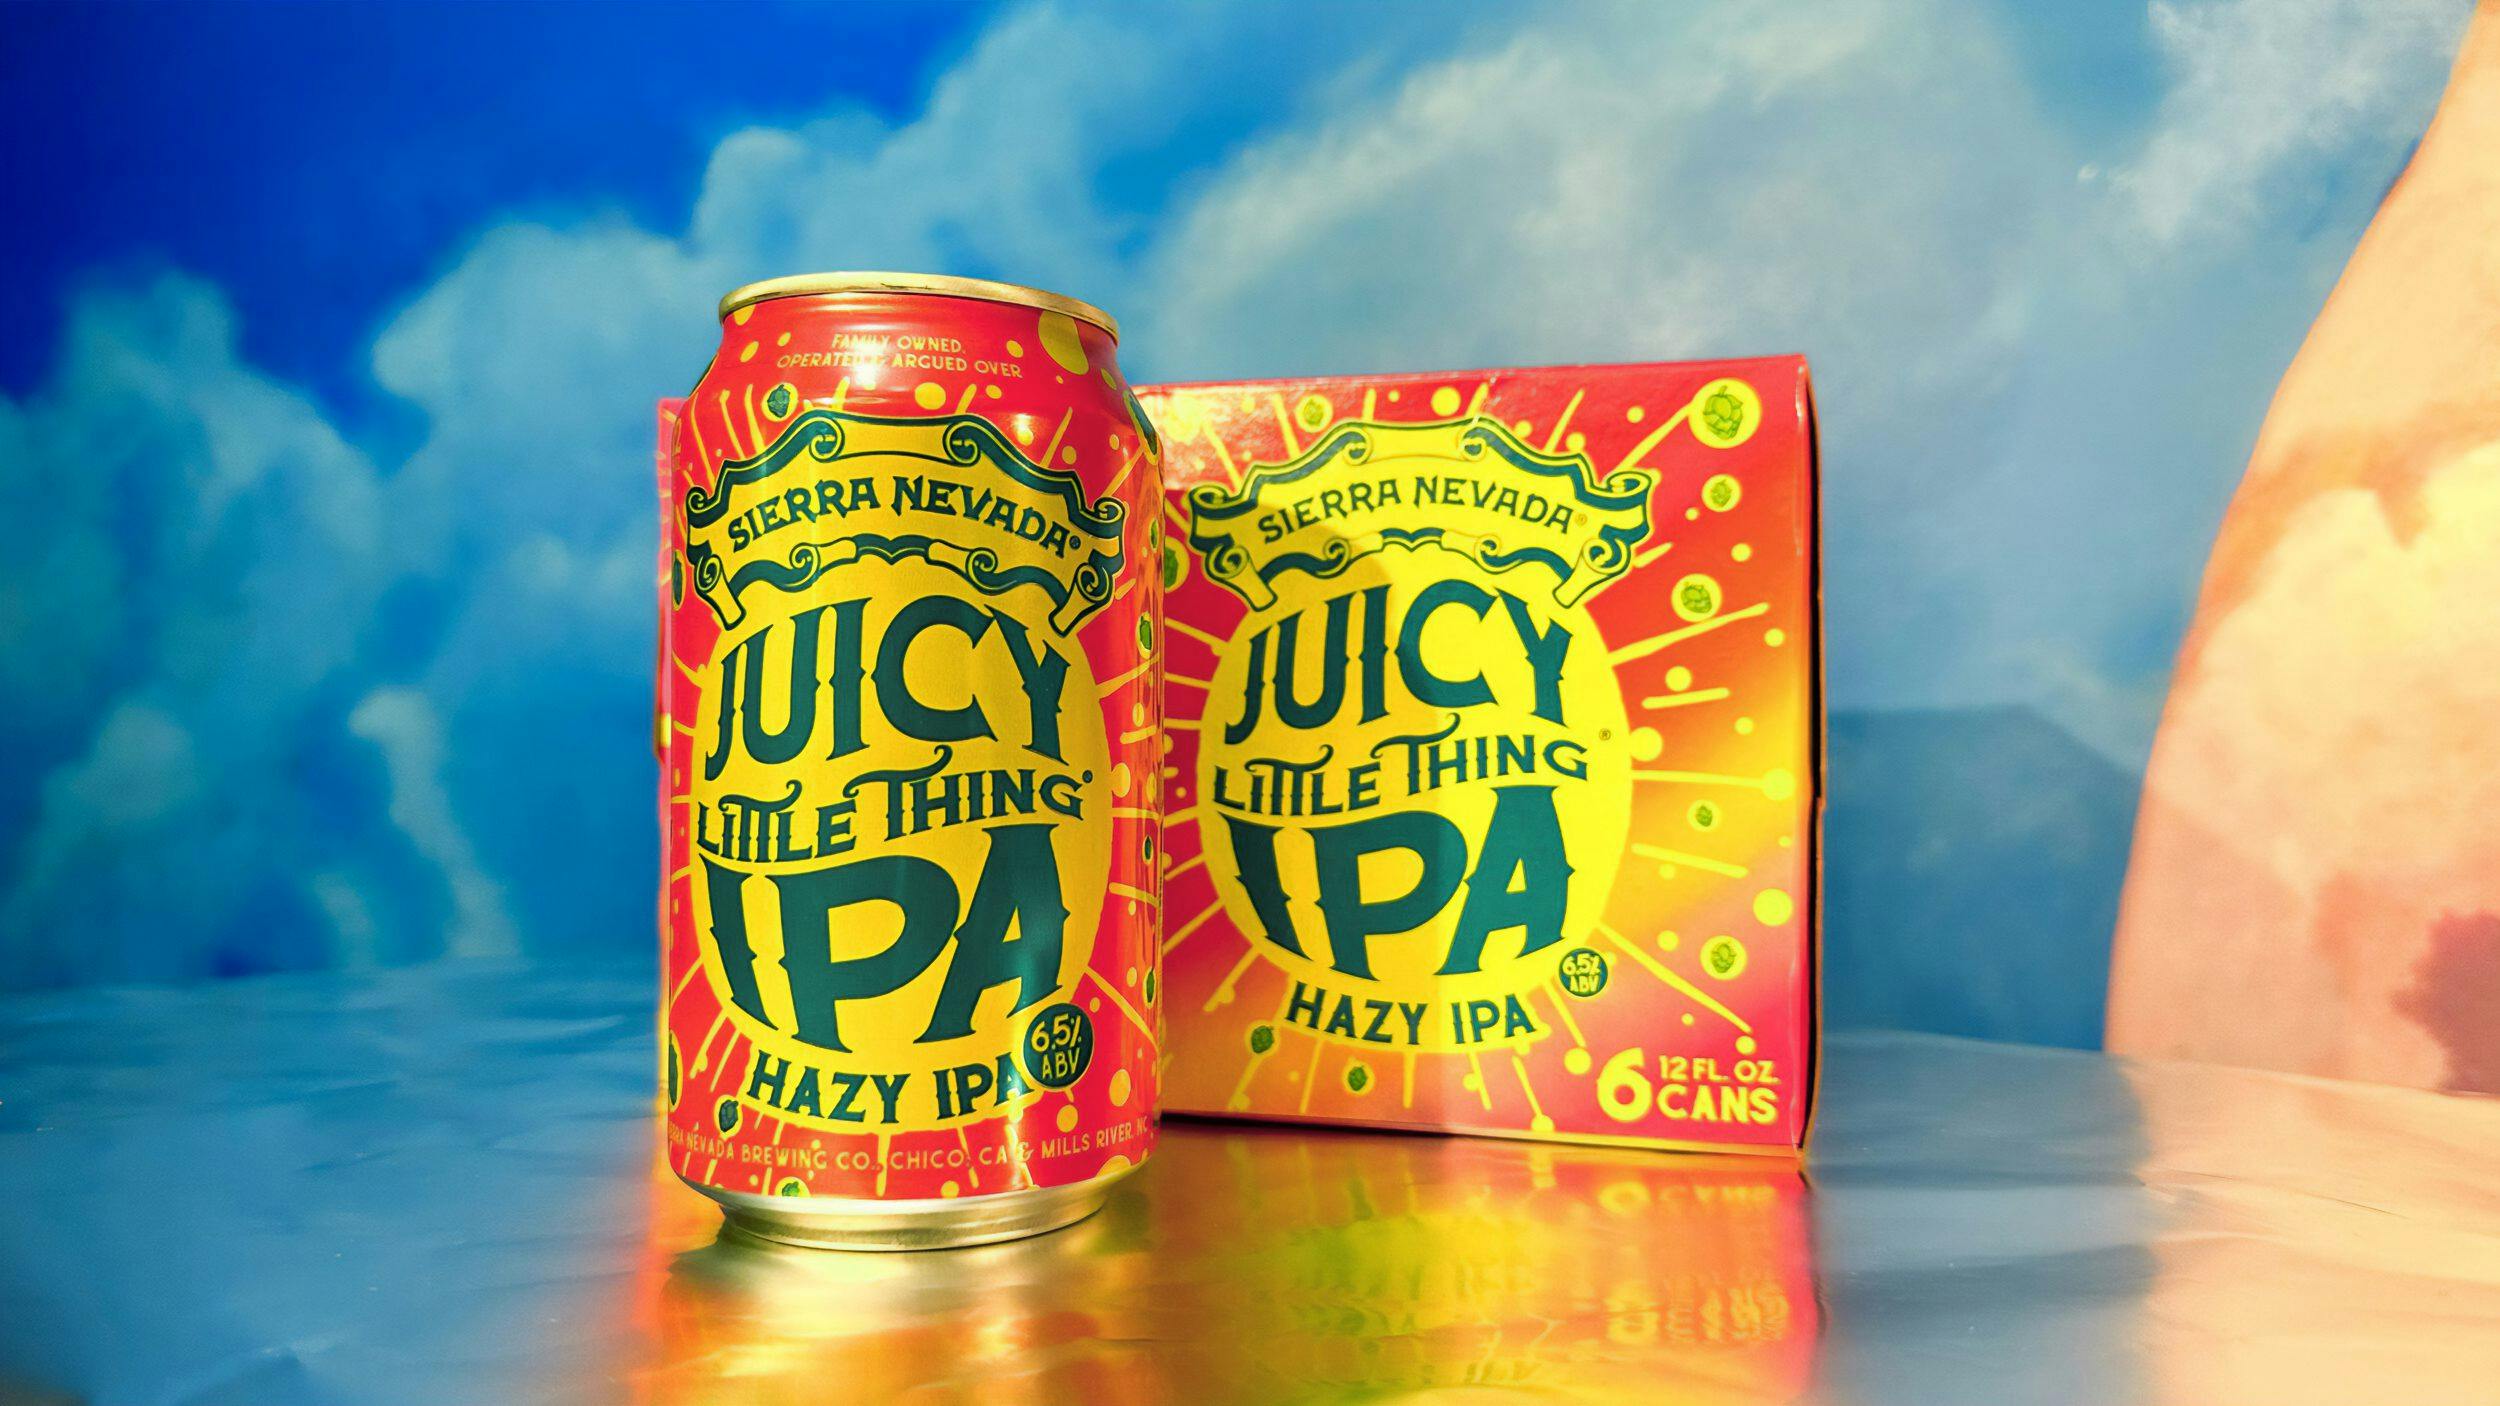 Juicy Little Thing can and 6-pack